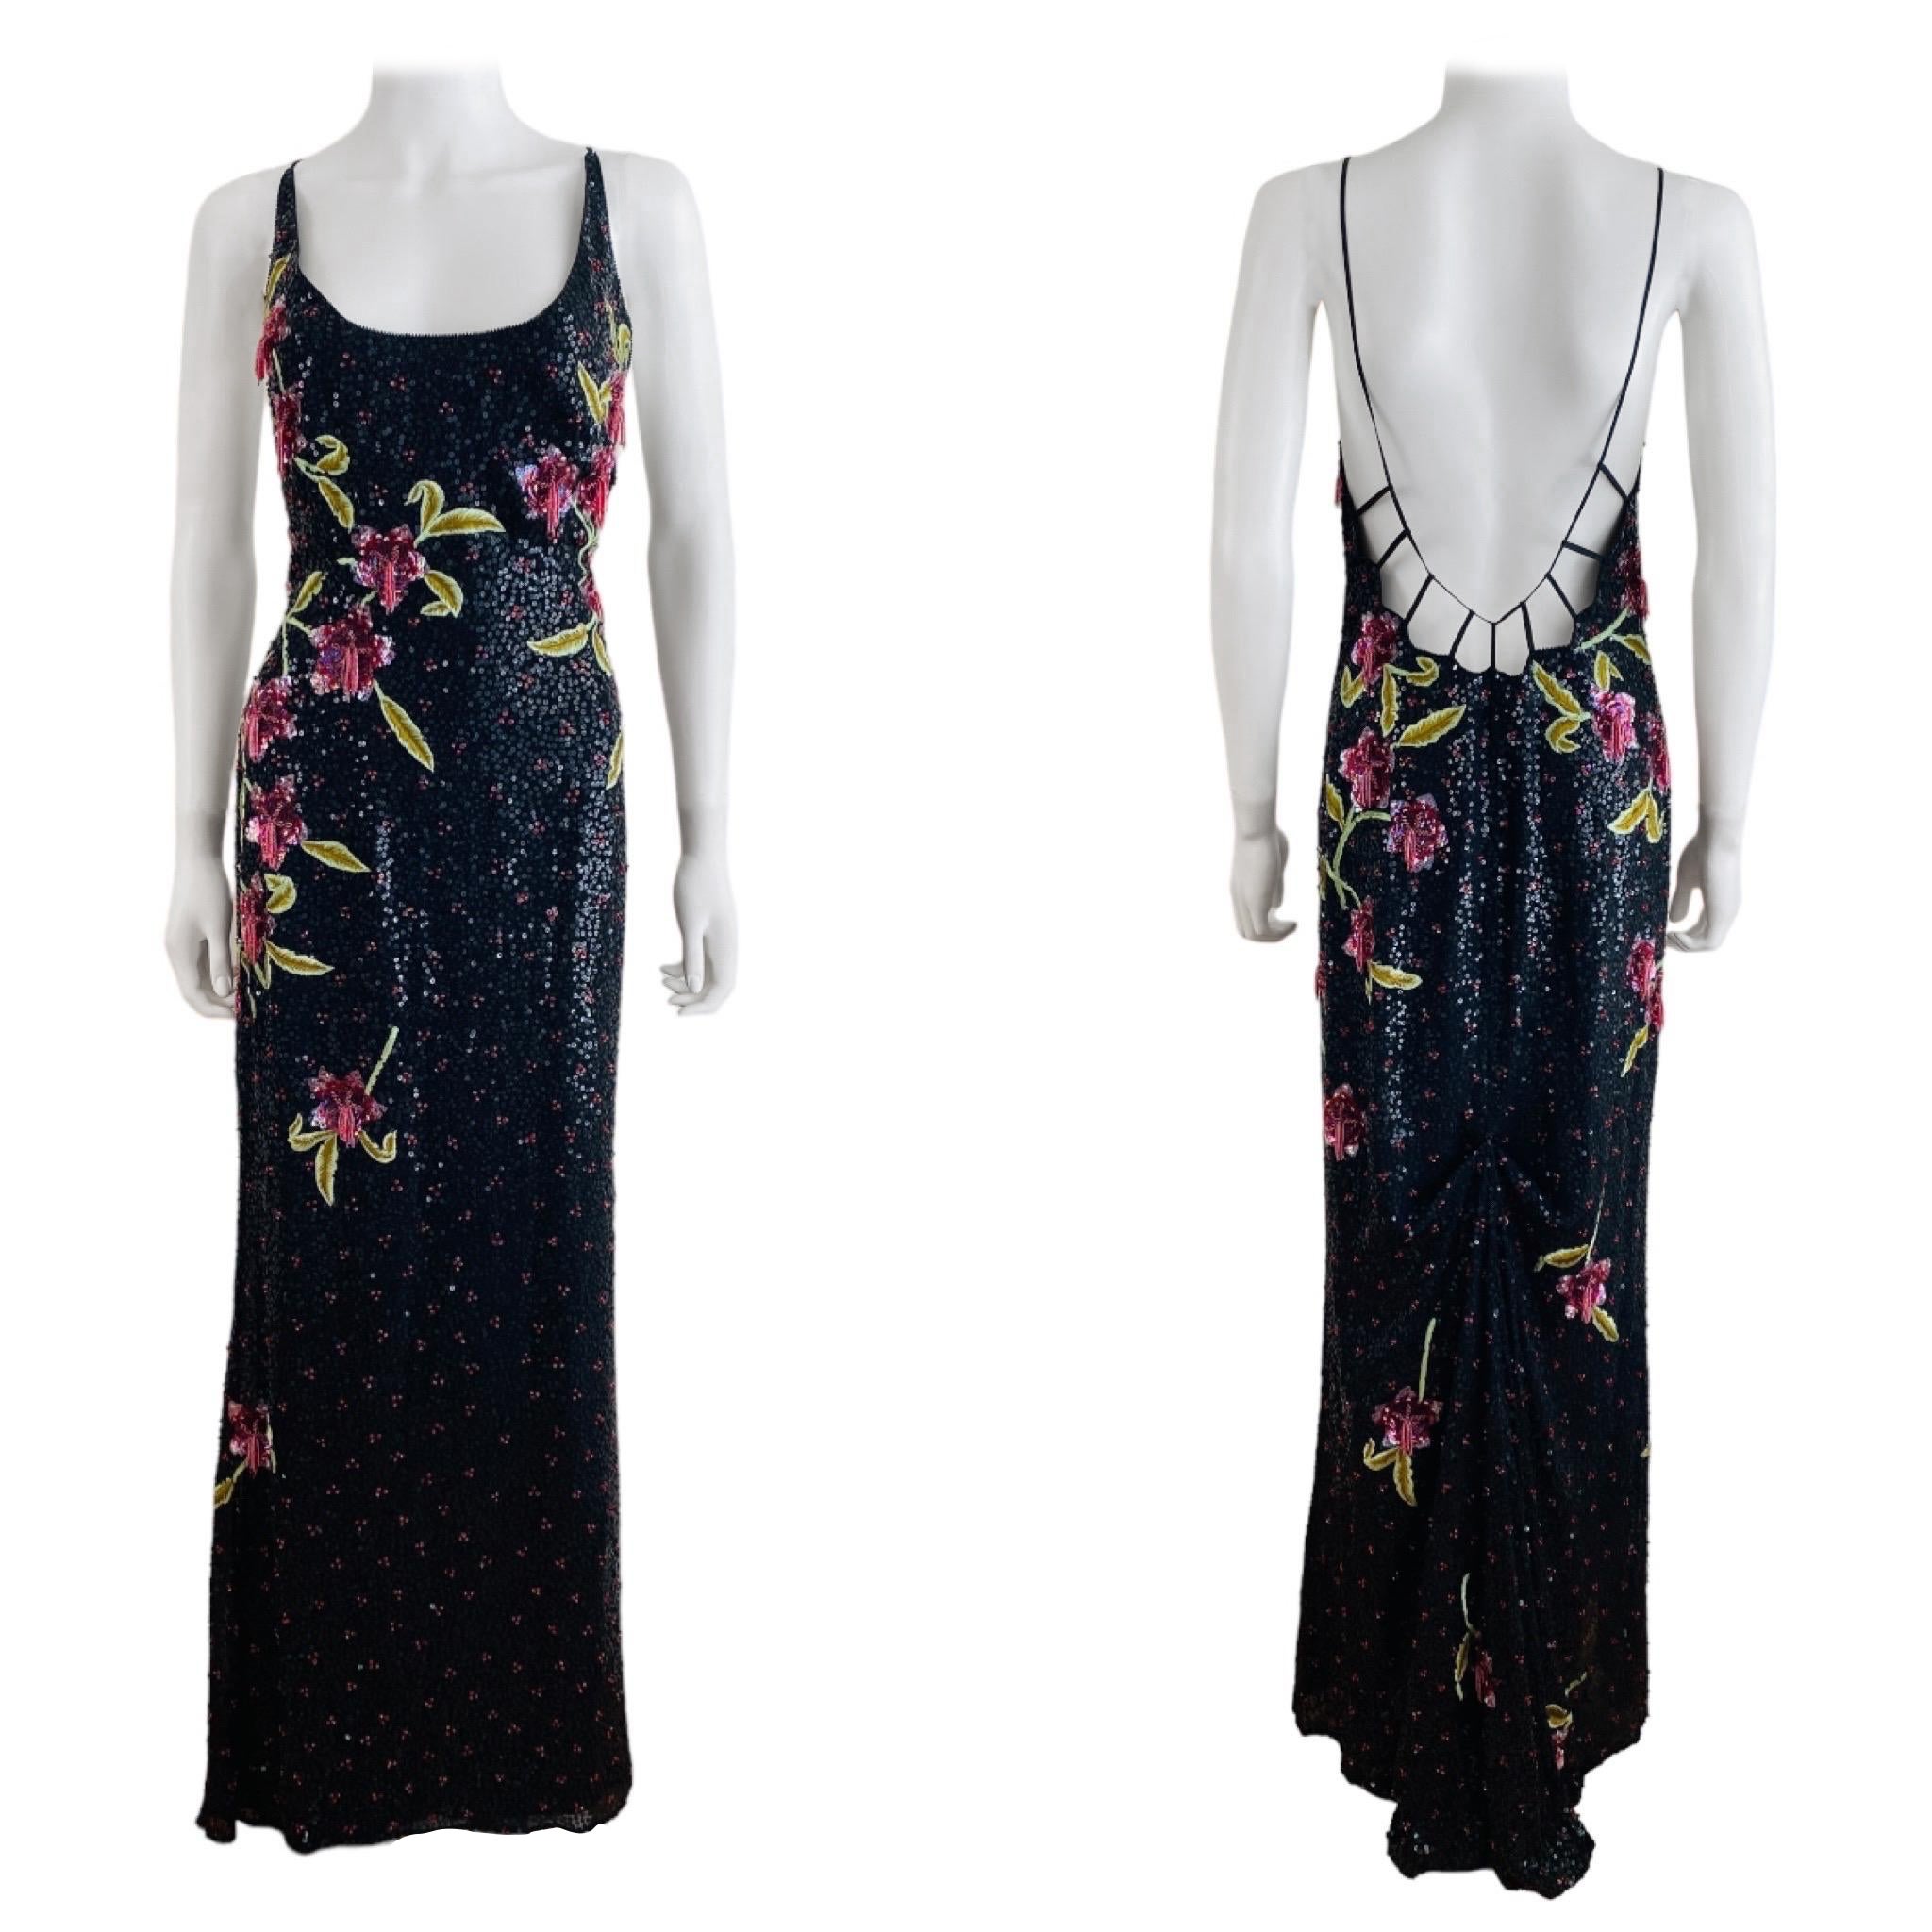 Vintage 2002 Escada Hand Beaded Sequin Floral Maxi Dress Gown Black Pink Flowers